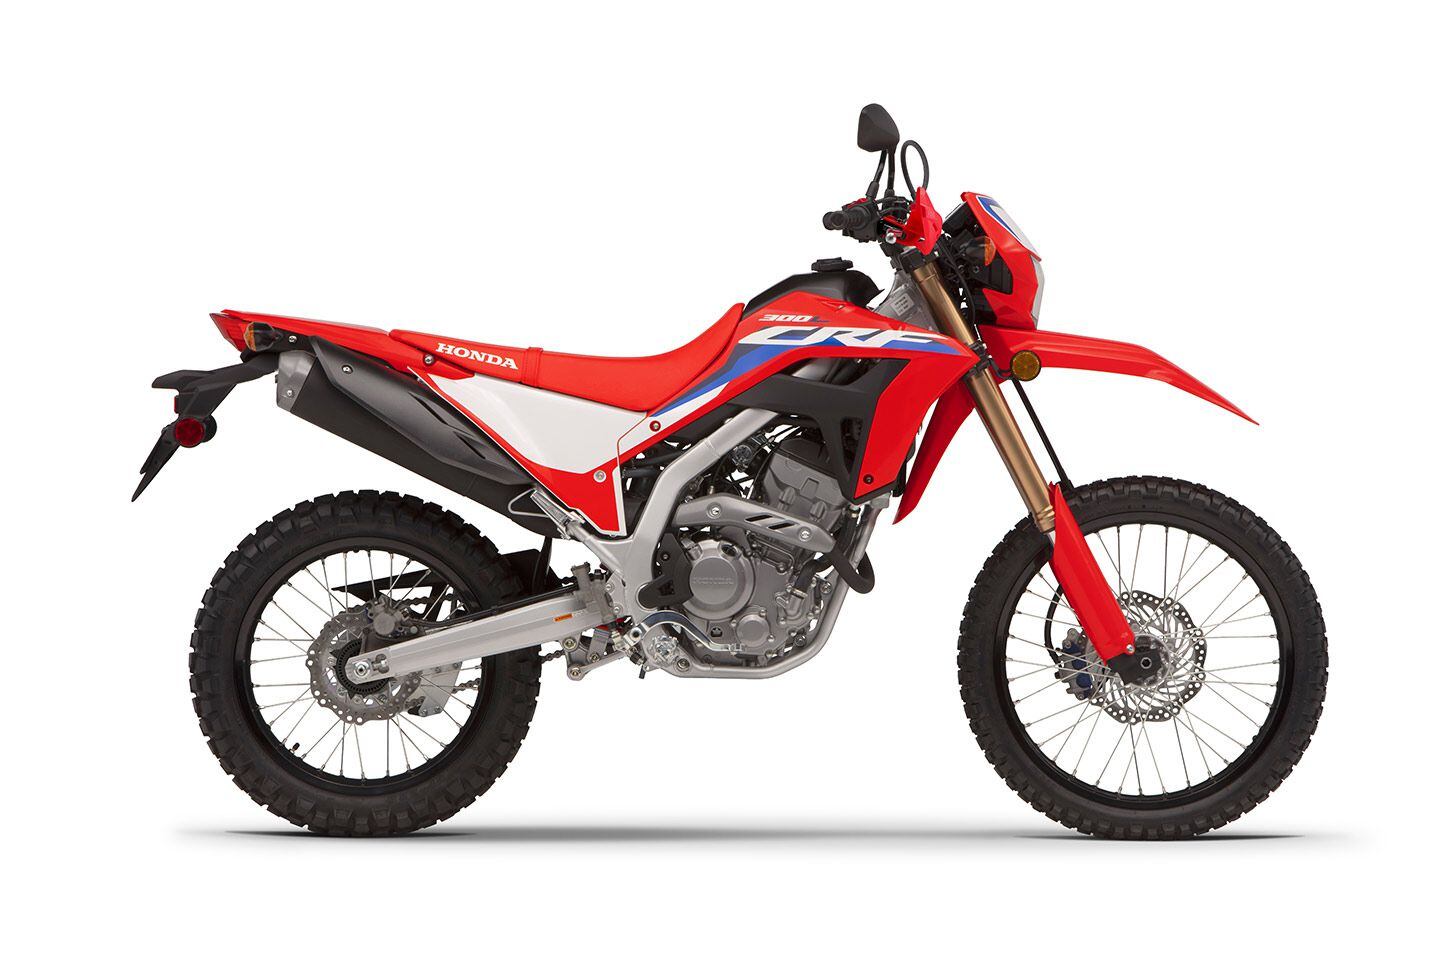 Honda updates its crossover motorcycle lineup - Images